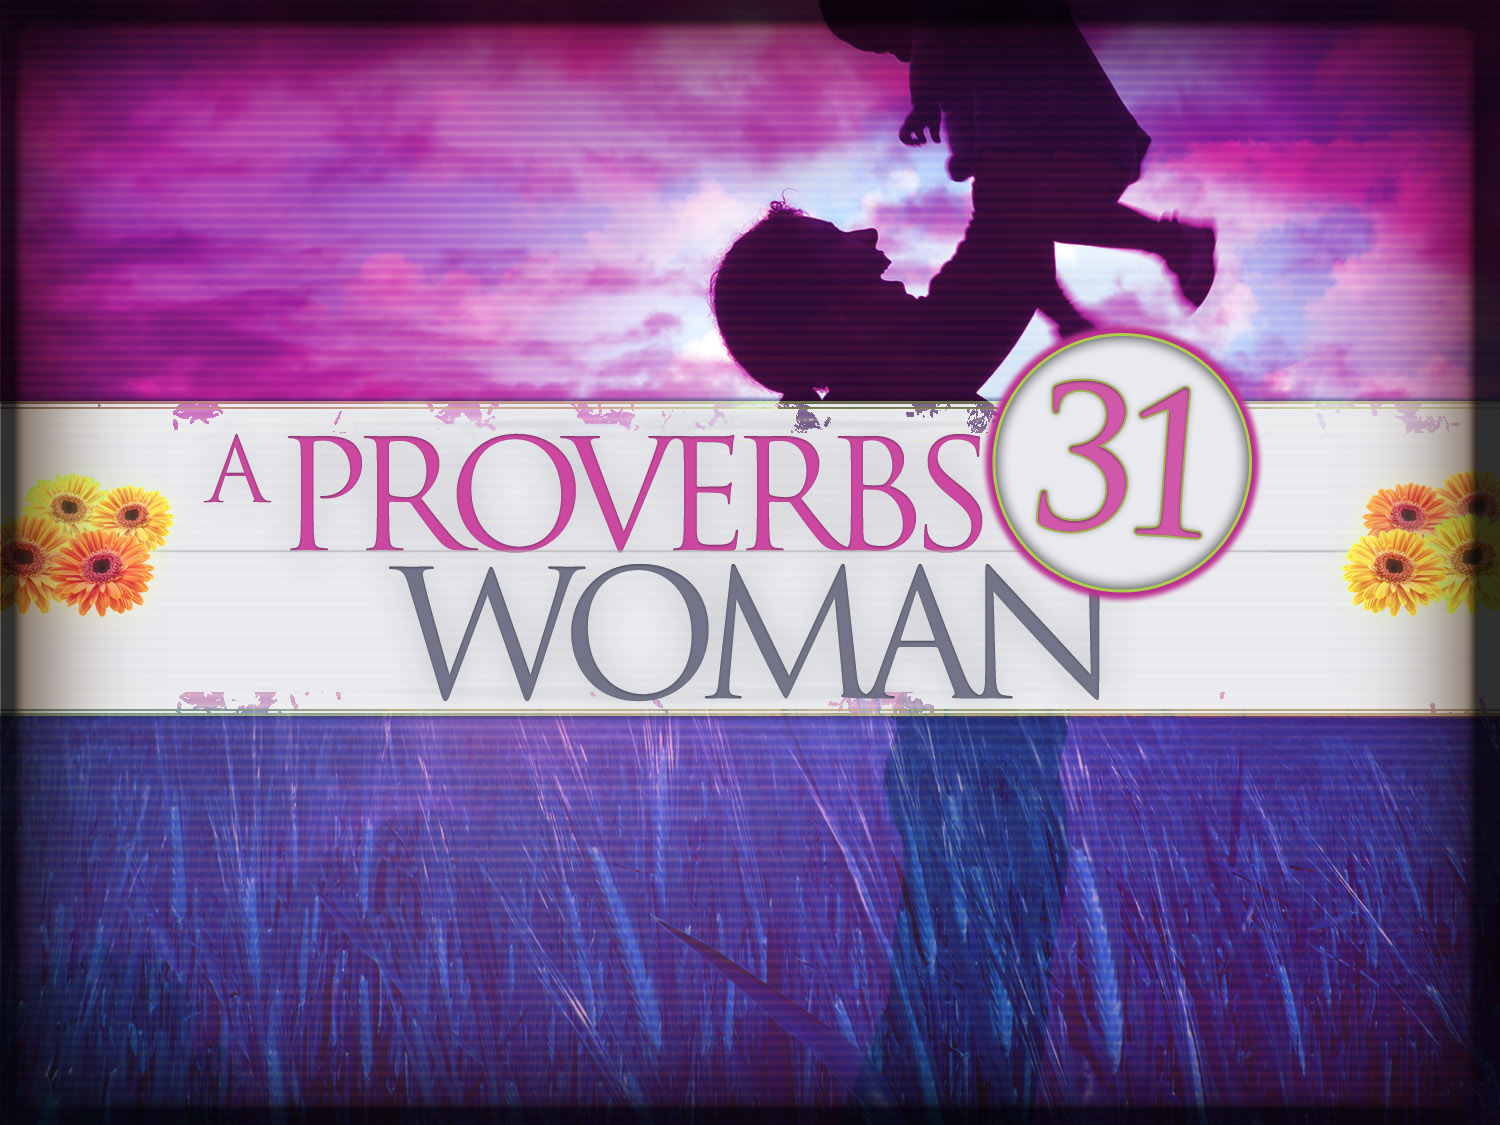 The Proverbs 31 Woman Aka The Virtuous Woman